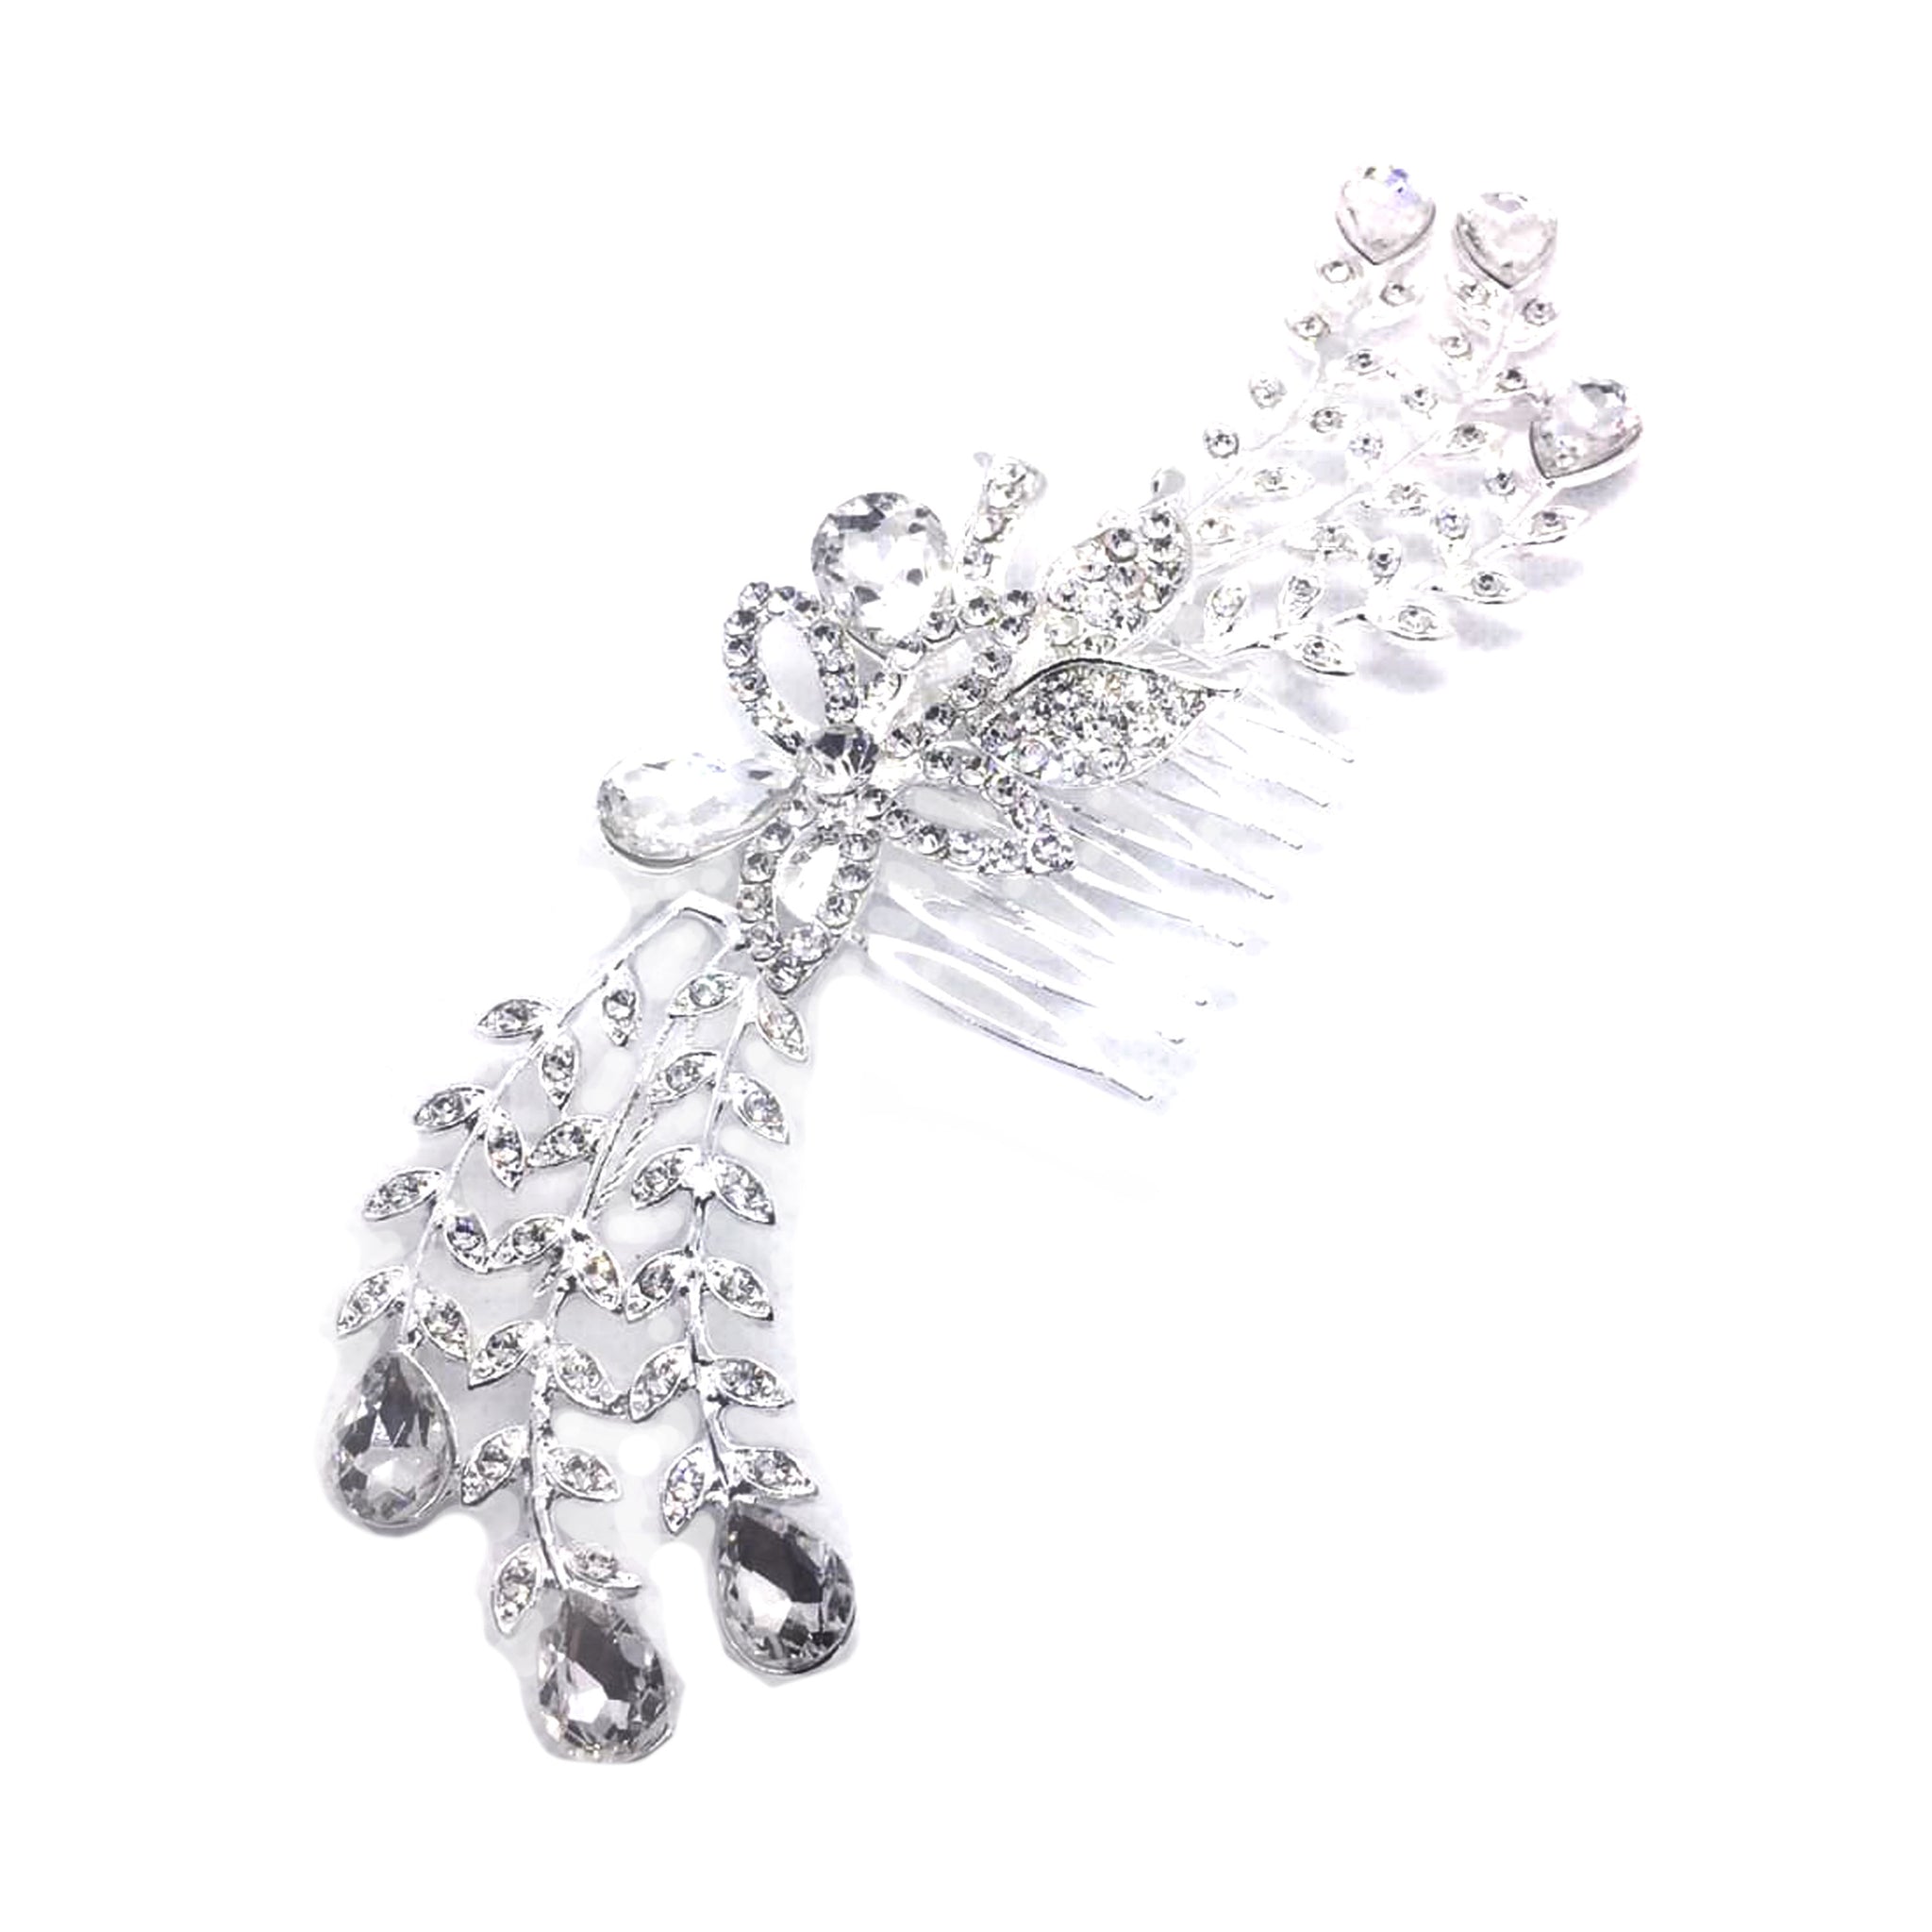 Bride Wedding Hair Comb Crystal Hair Jewelry Headpieces Side Combs Bridal Decorative Prom Hair Accessories for Women and Girls - Simpal Boutique